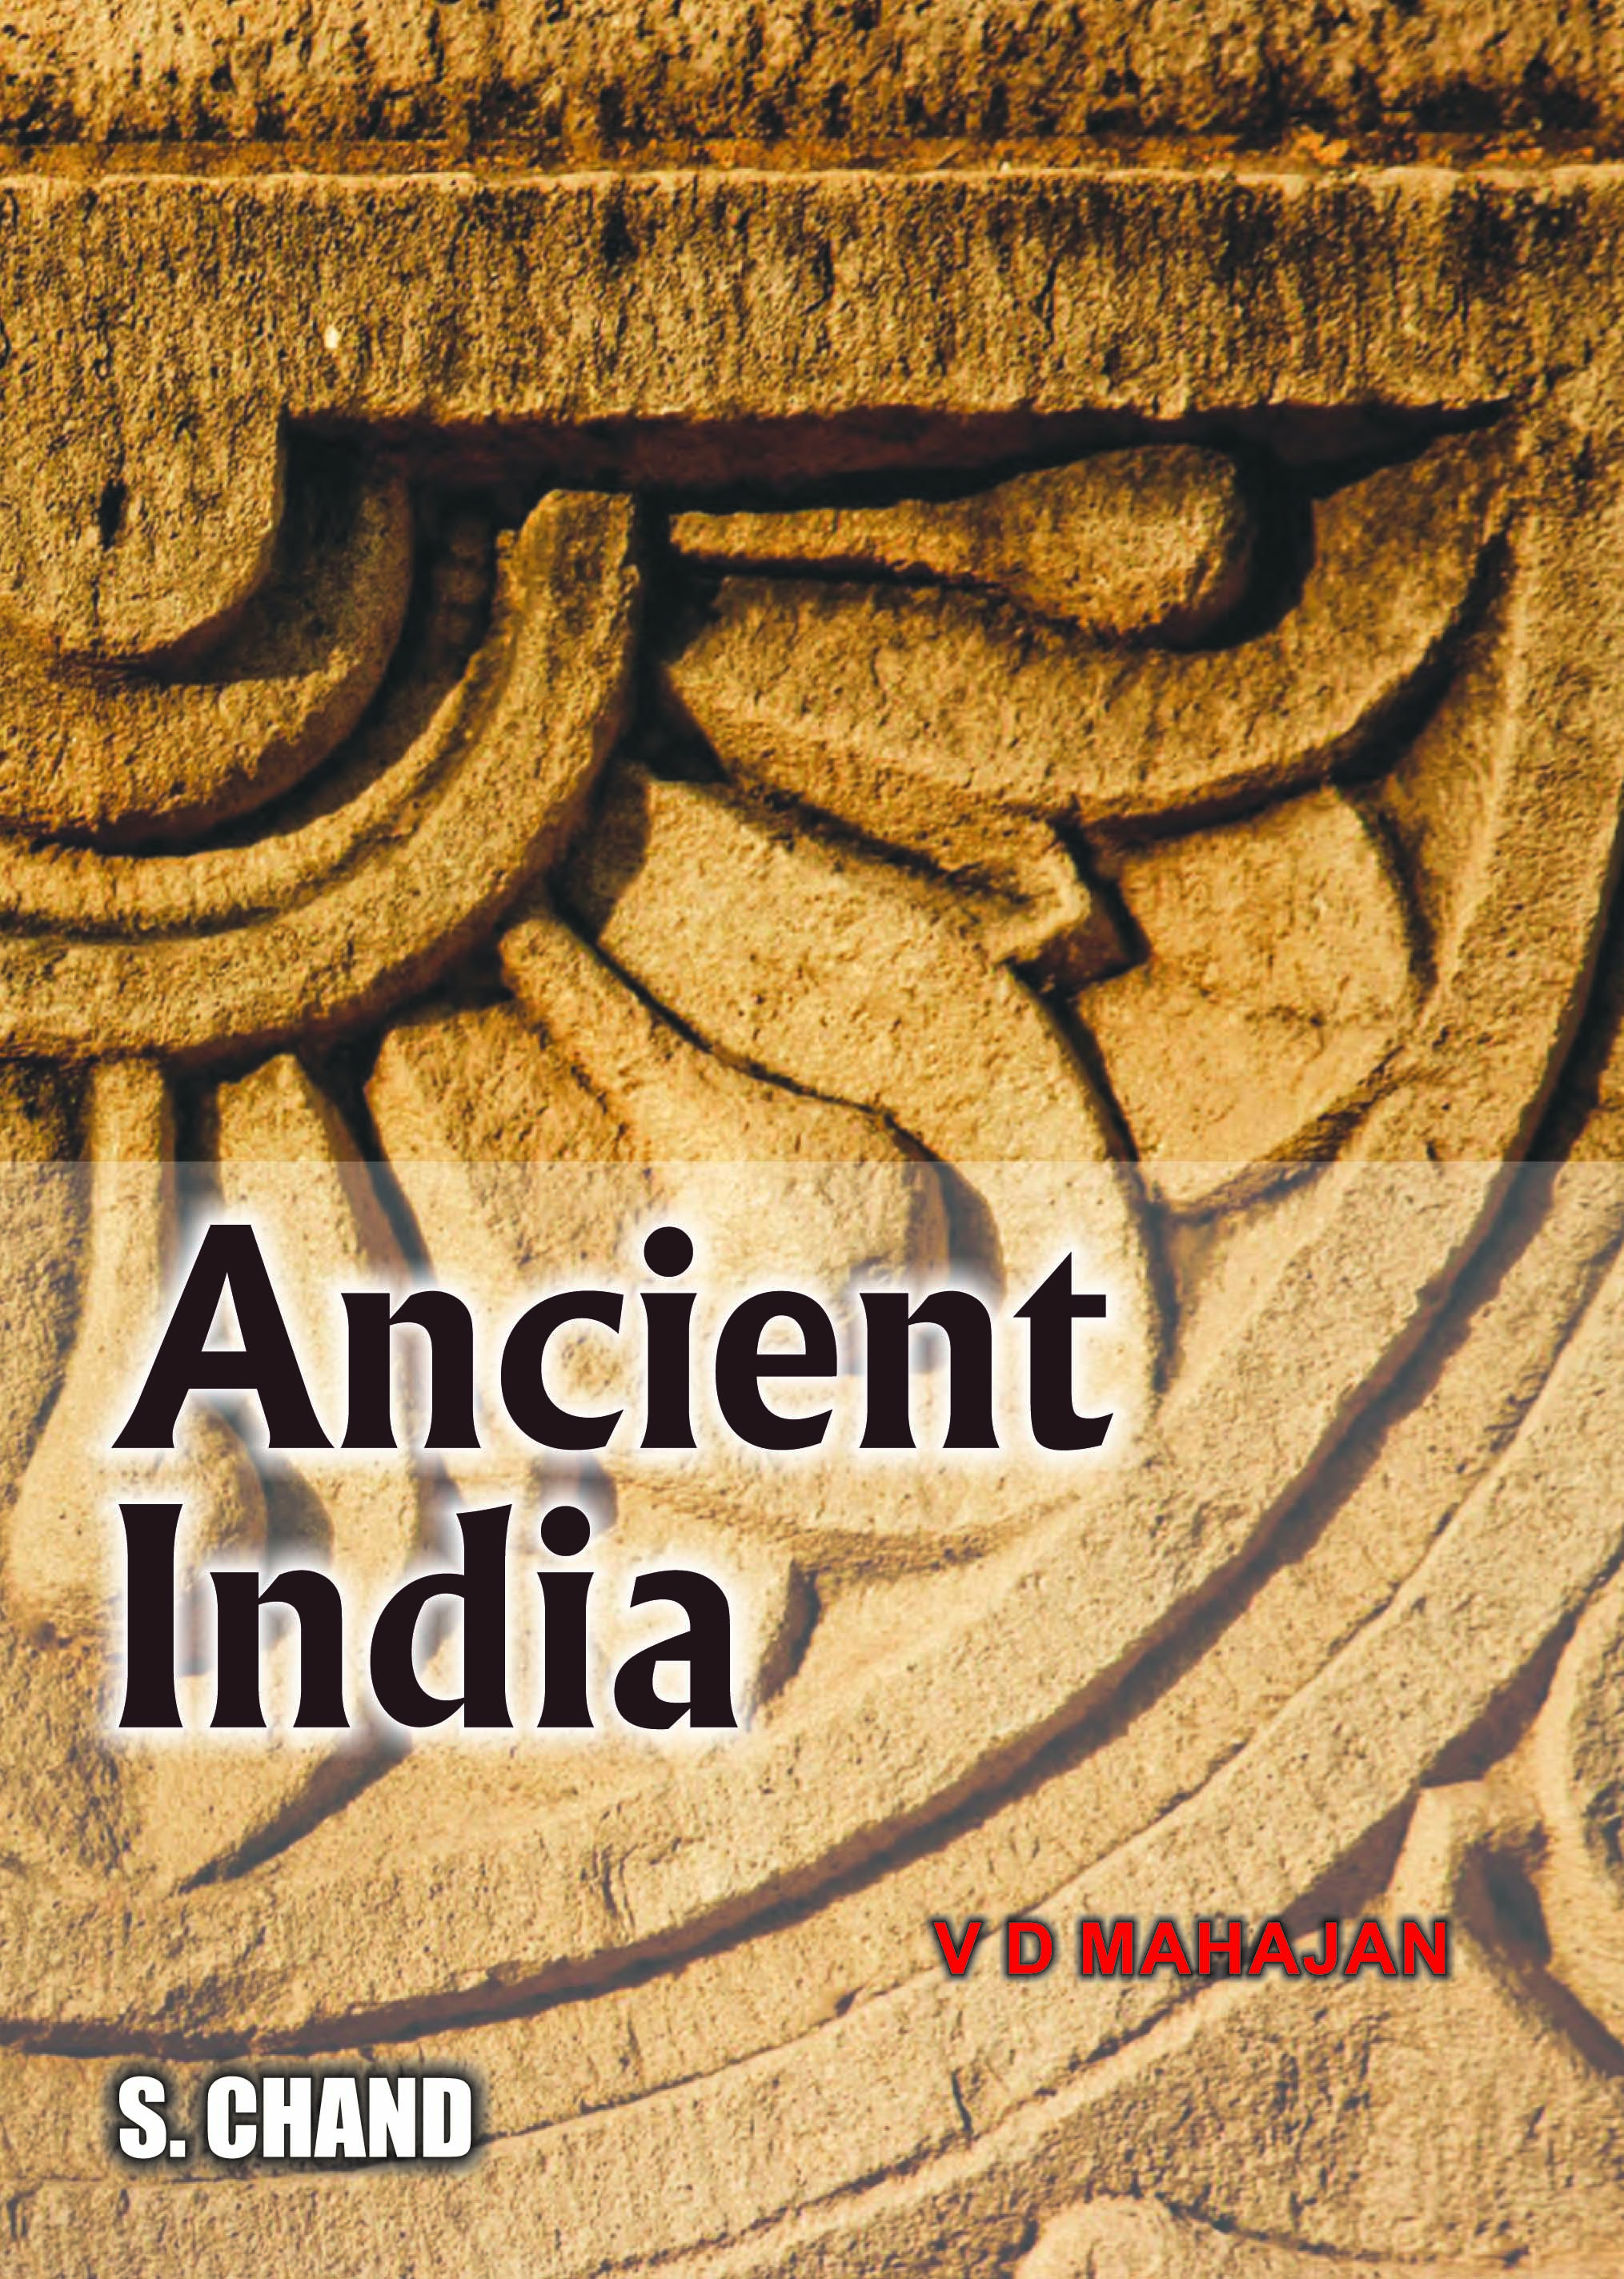 research topics in ancient indian history